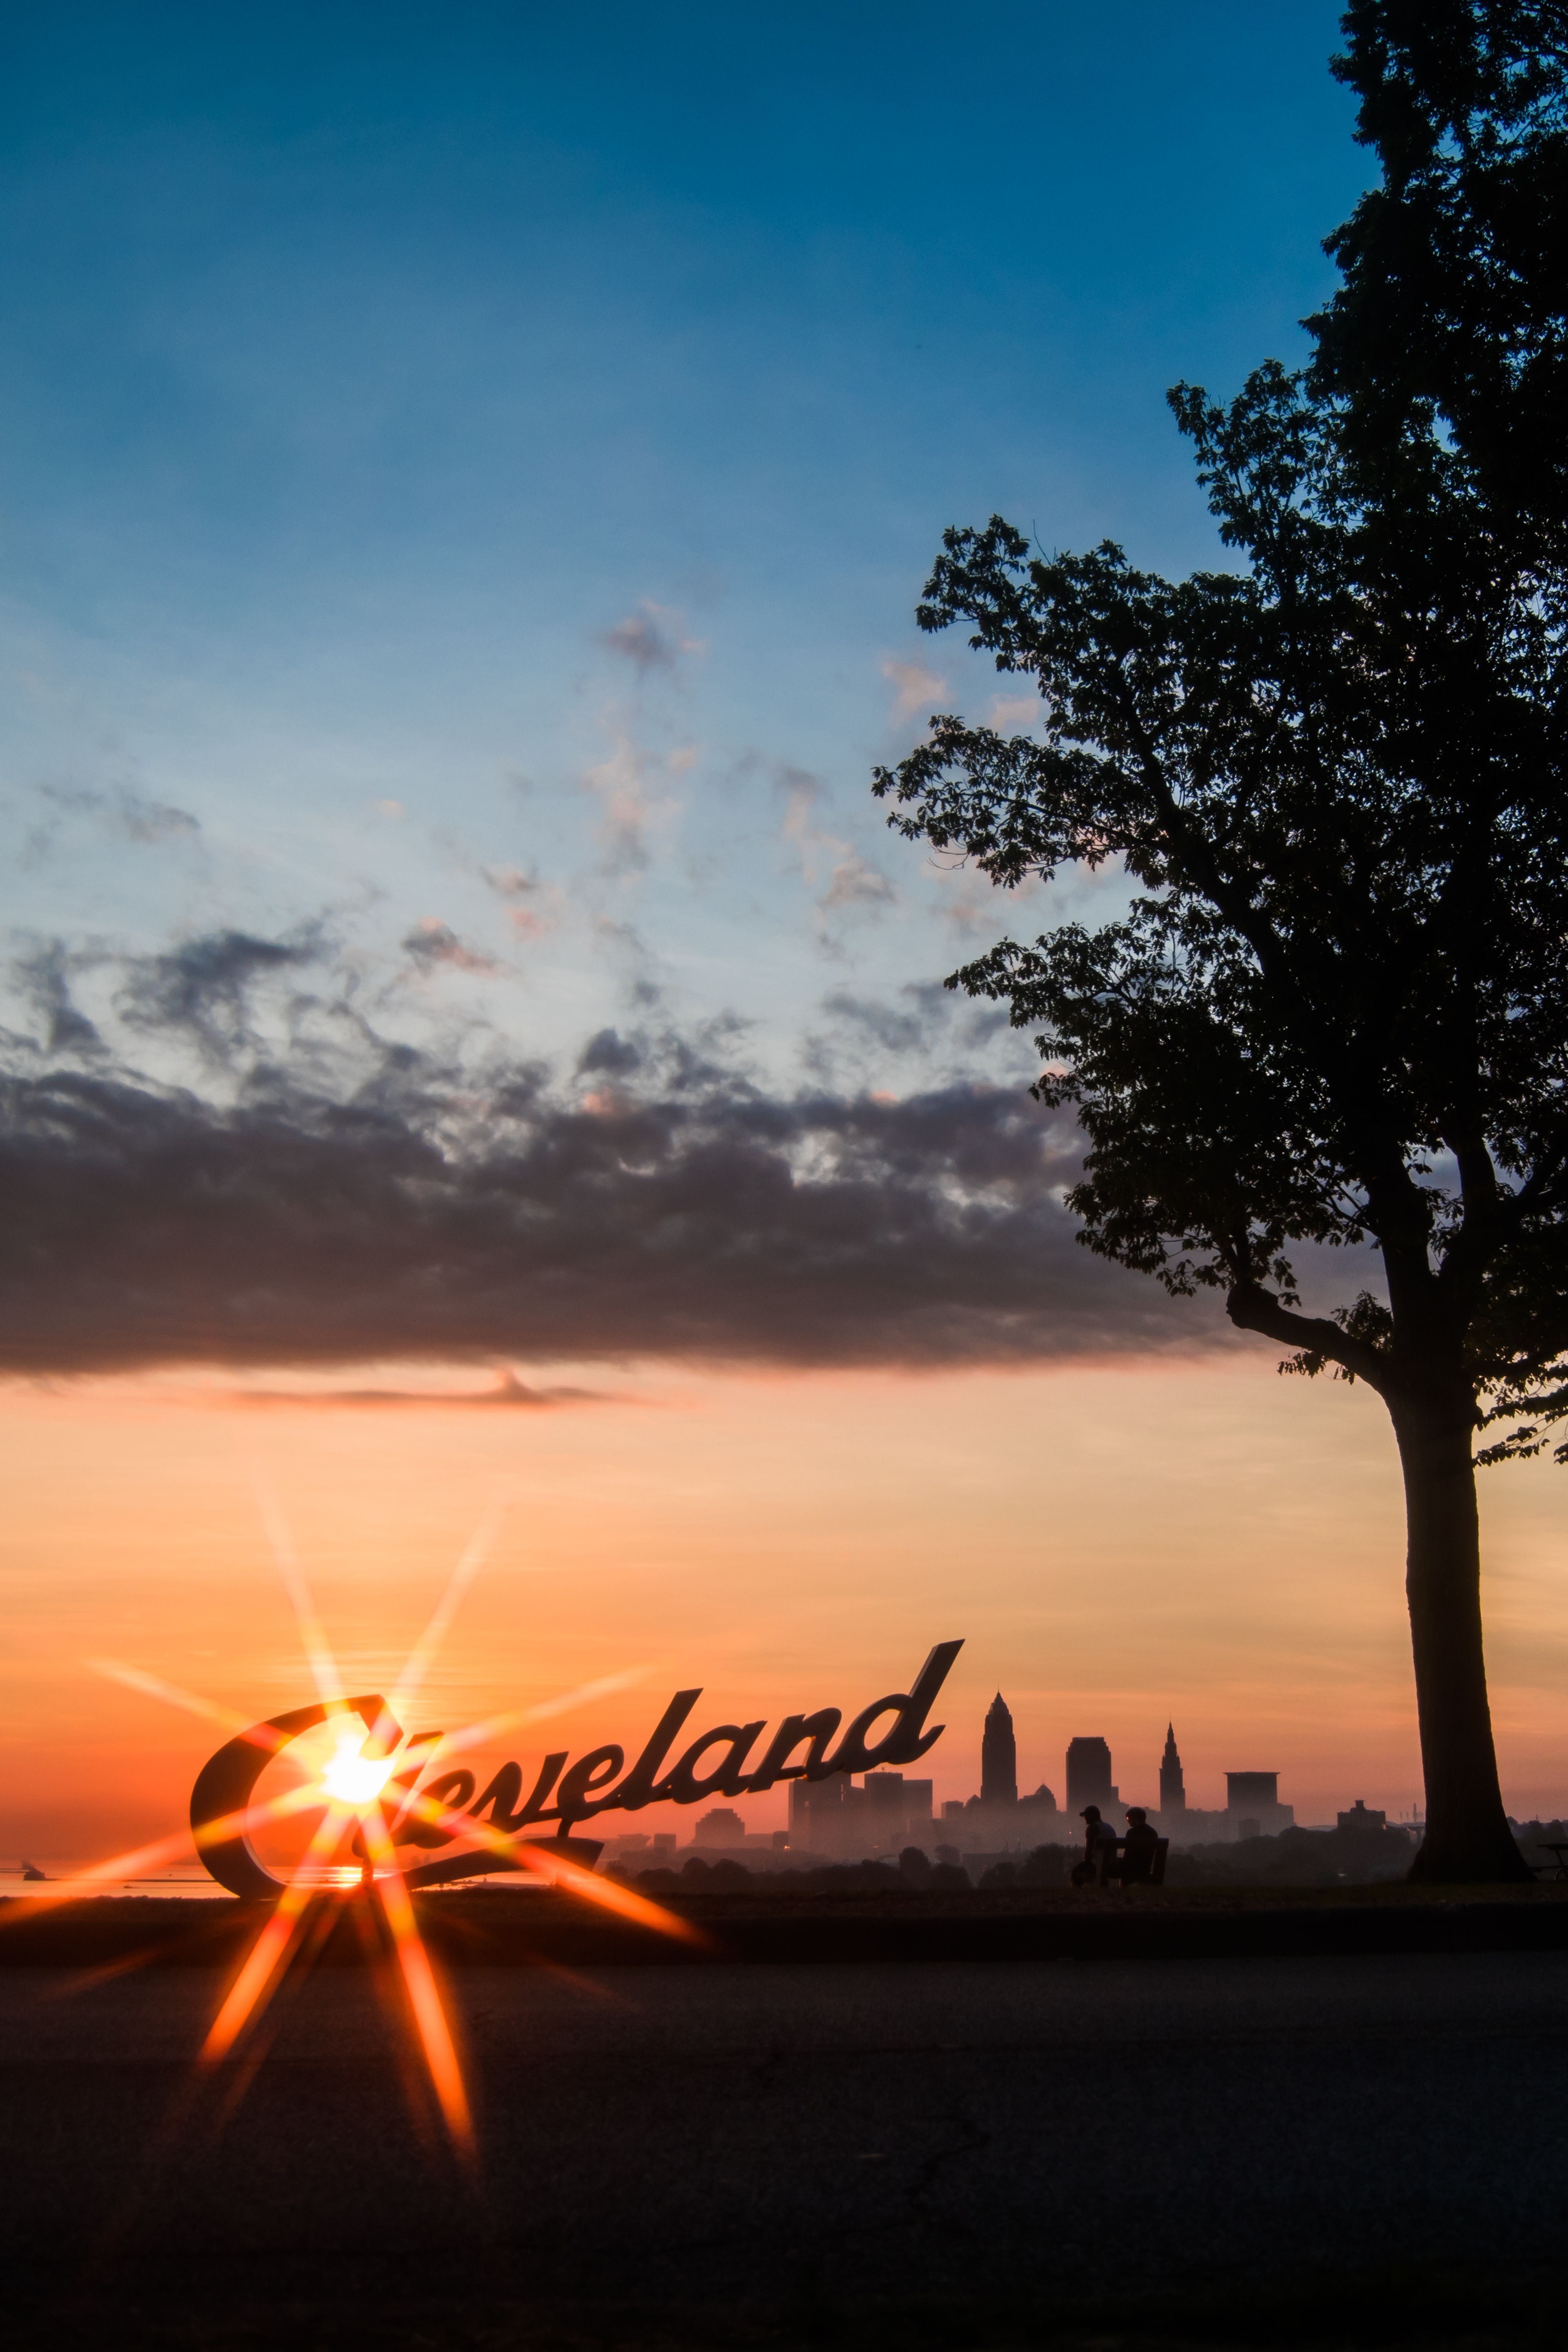 cities, sunset, silhouettes, night city, inscription, sunlight, cleveland images